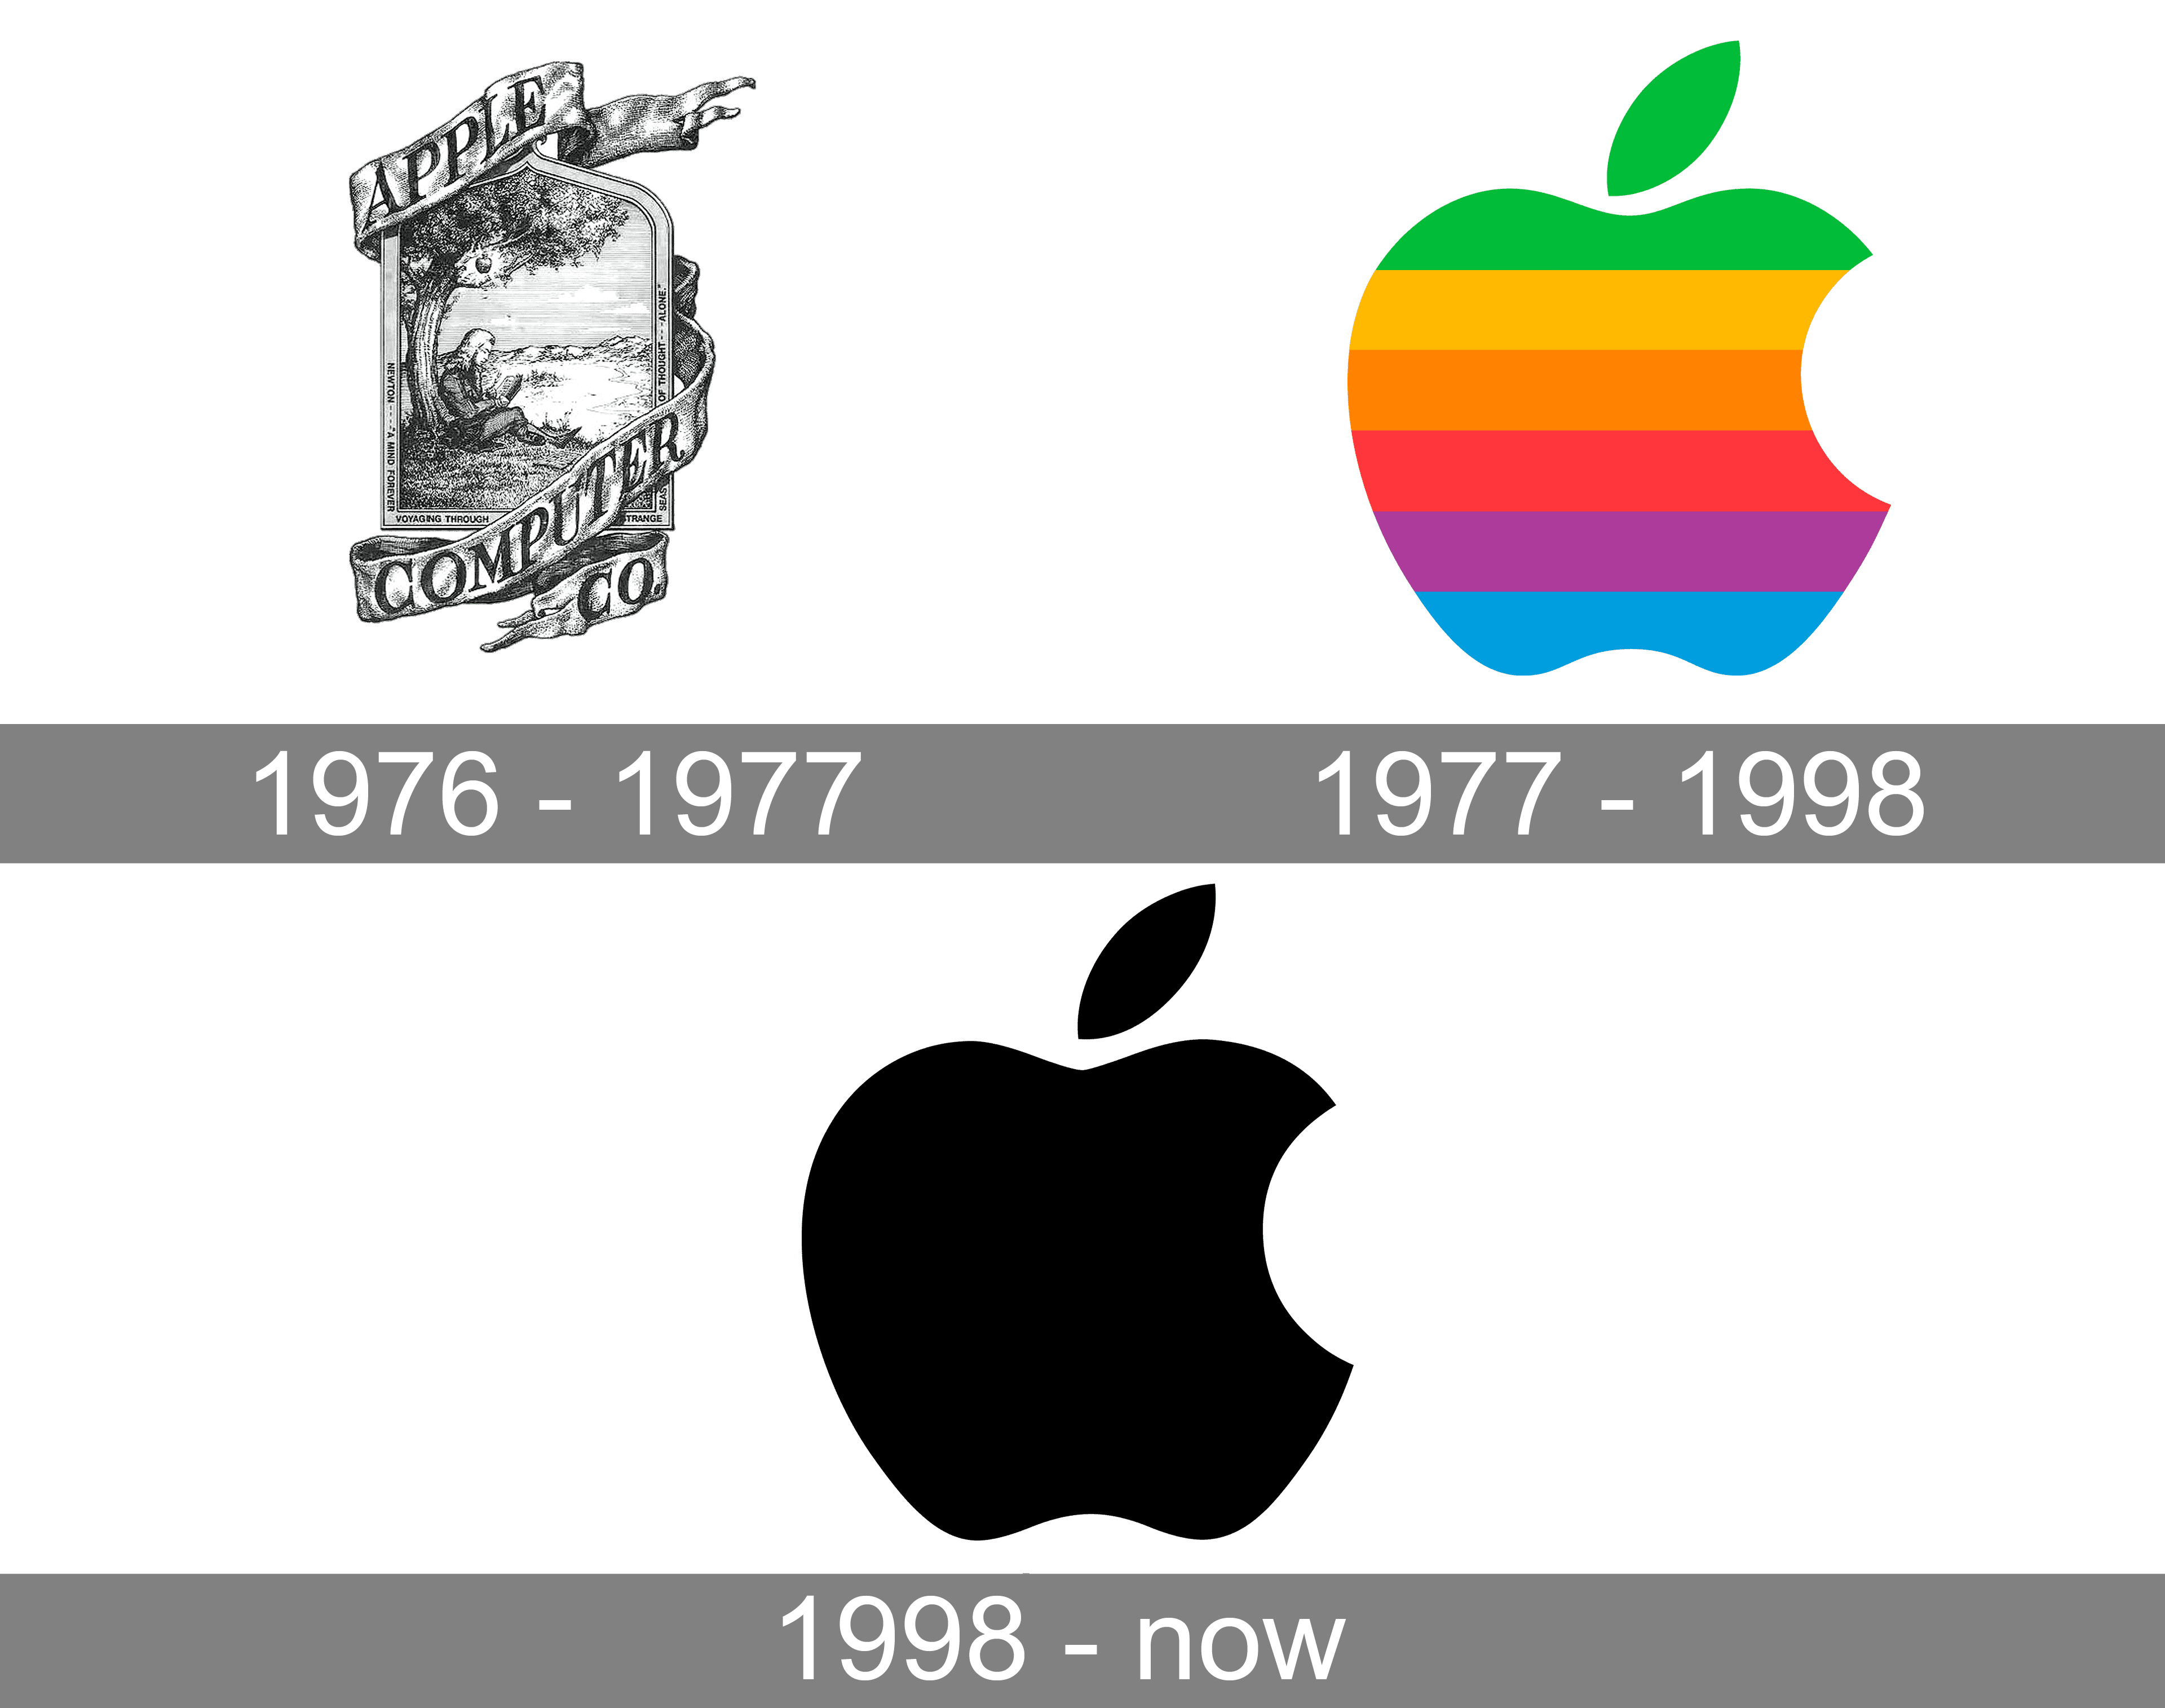 Apple Logo and symbol, meaning, history, PNG, brand